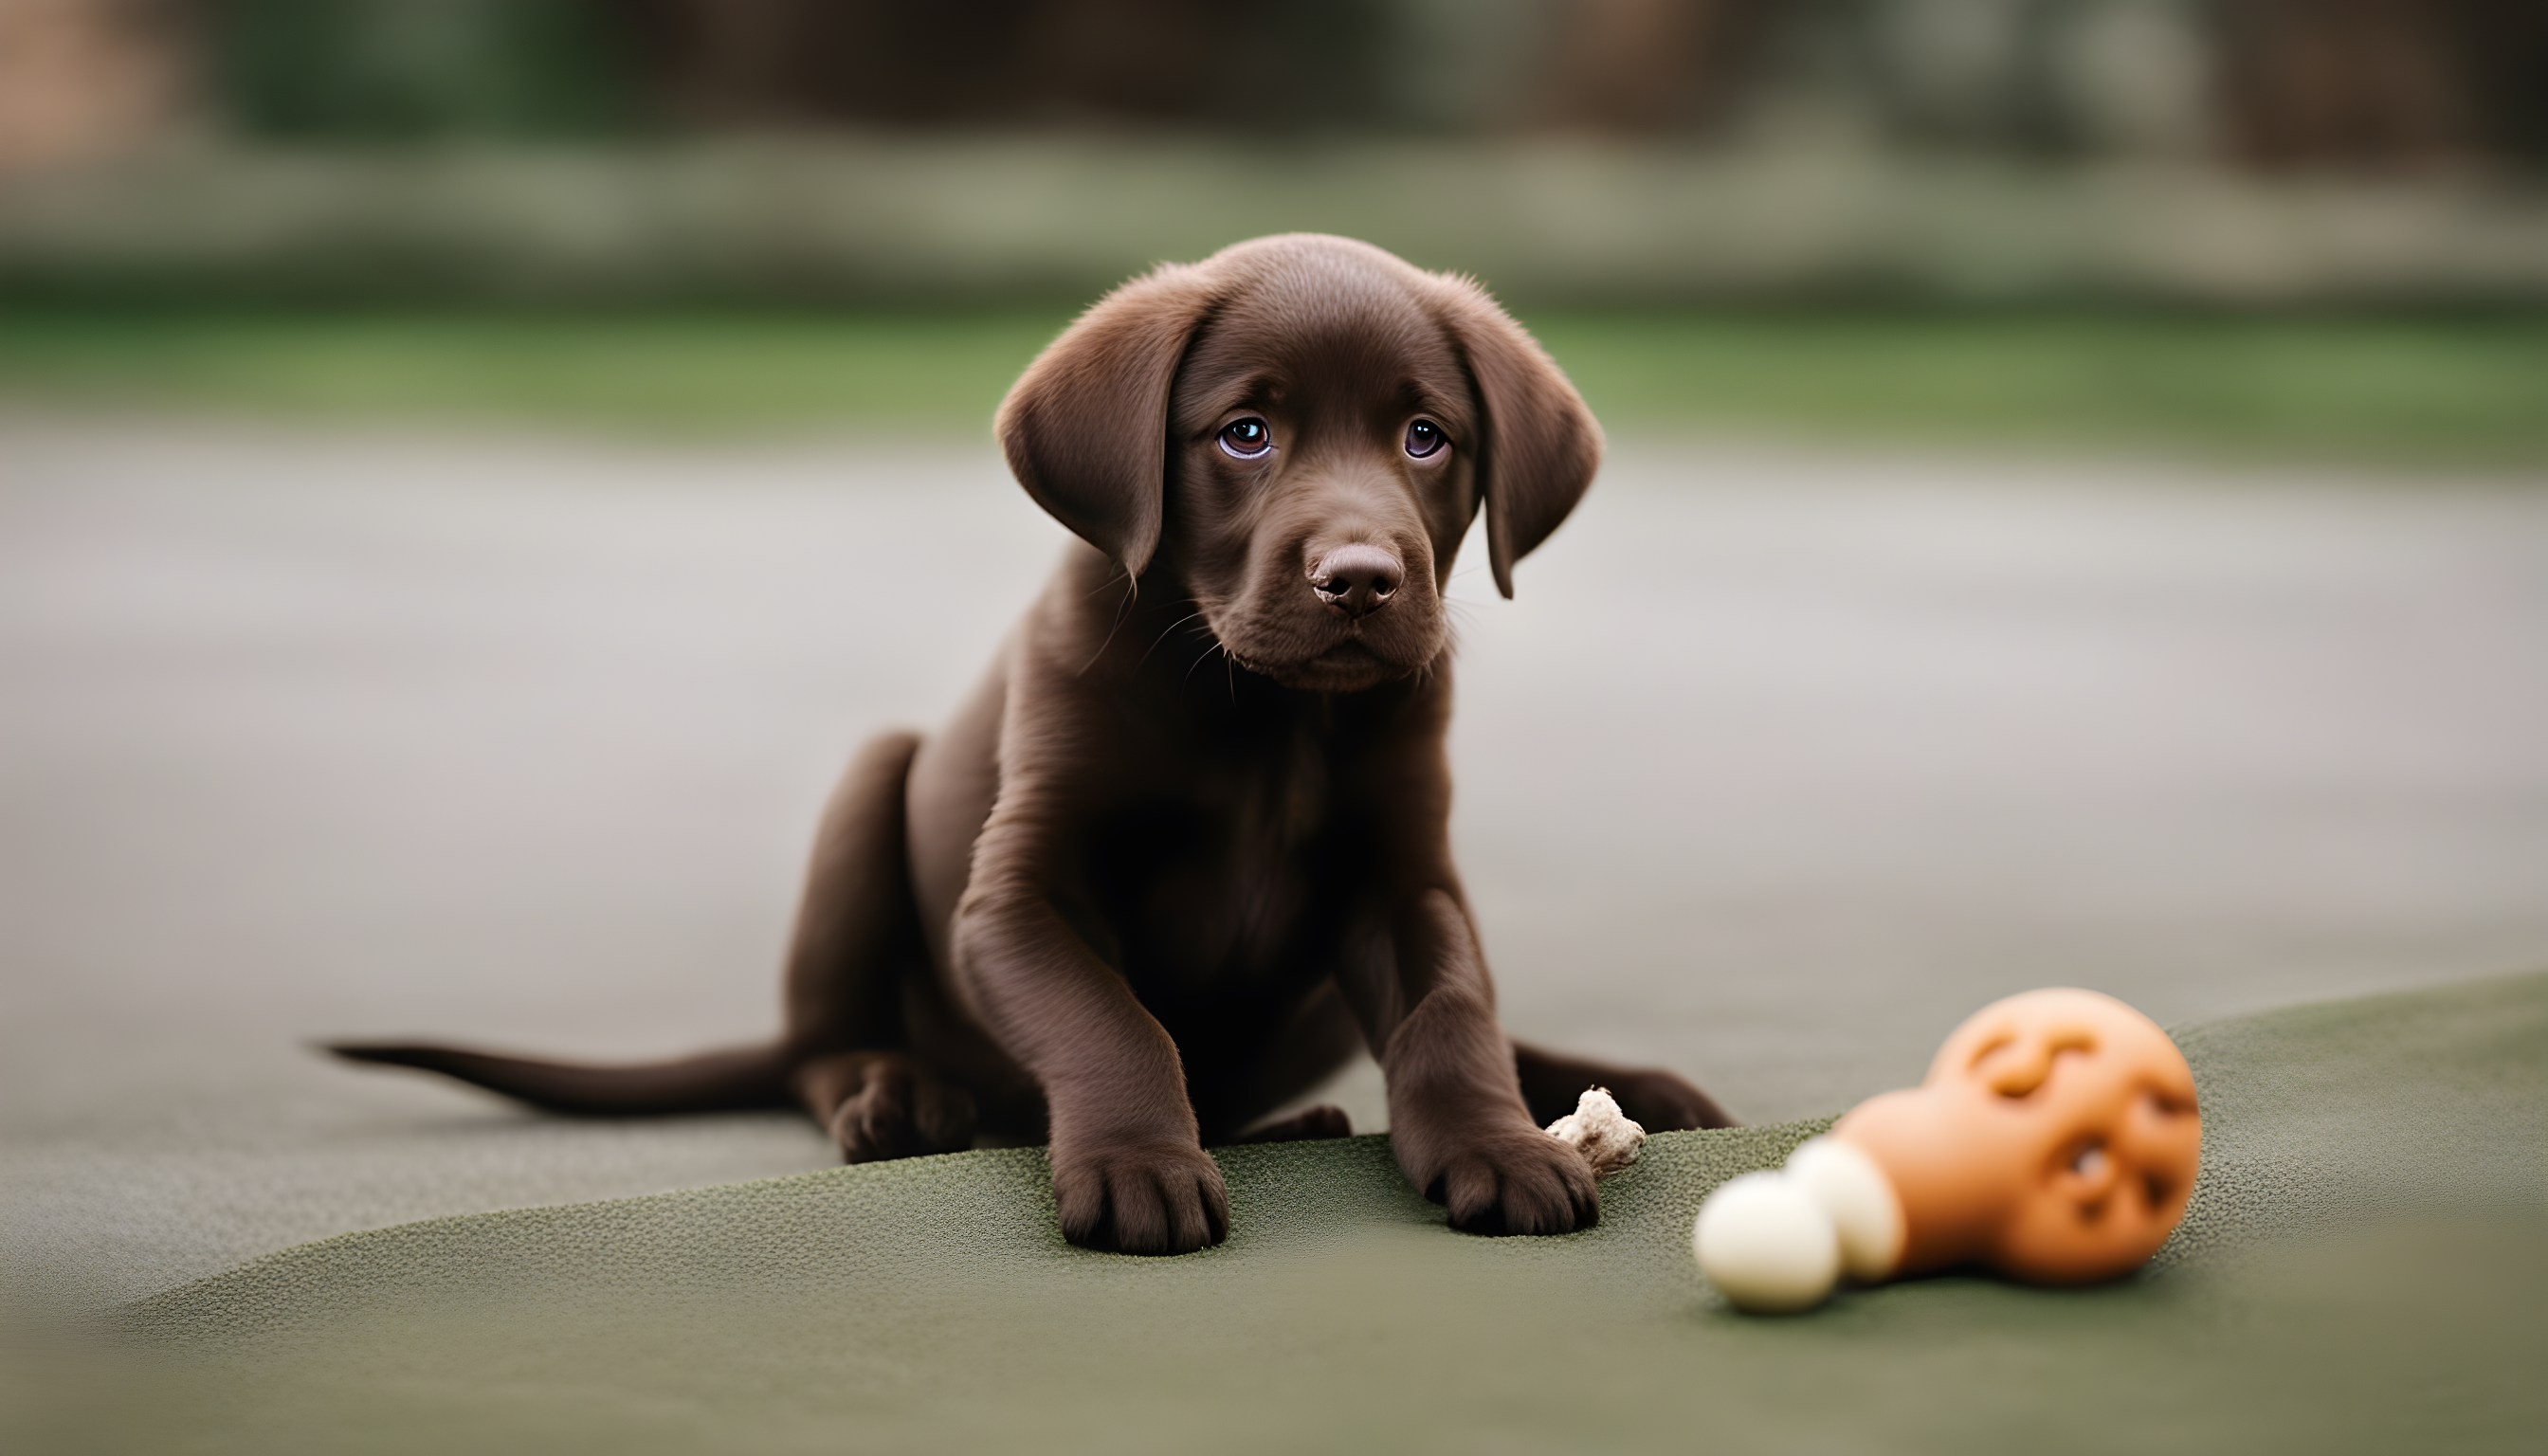 A chocolate lab puppy transitioning into adolescence, looking a bit rebellious while ignoring a chew toy, encapsulating the unpredictable teen phase